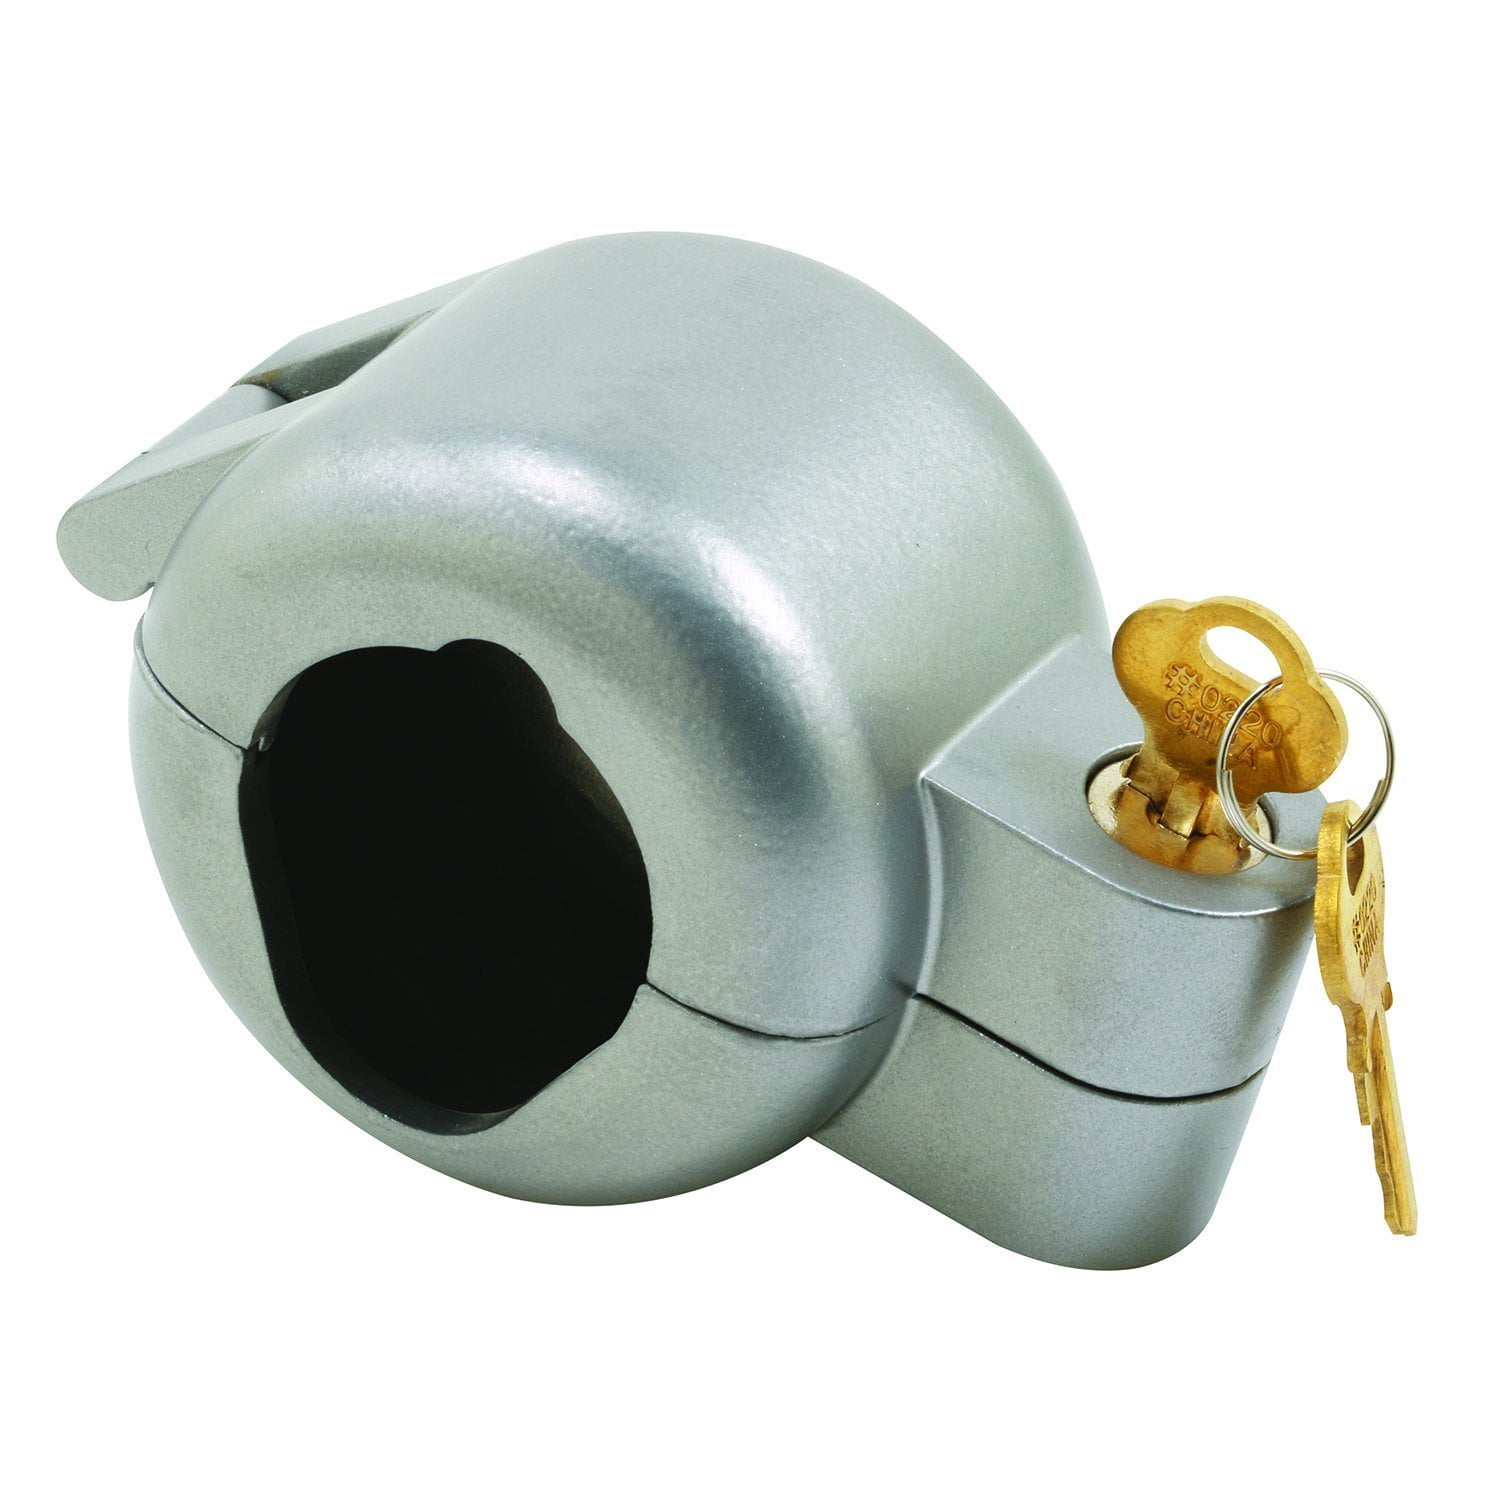 S 4180 Door Knob Lock-Out Device, Diecast Construction, Gray Painted Color,  Keyed Alike, This knob lock-out device is used to prevent access to.., By  